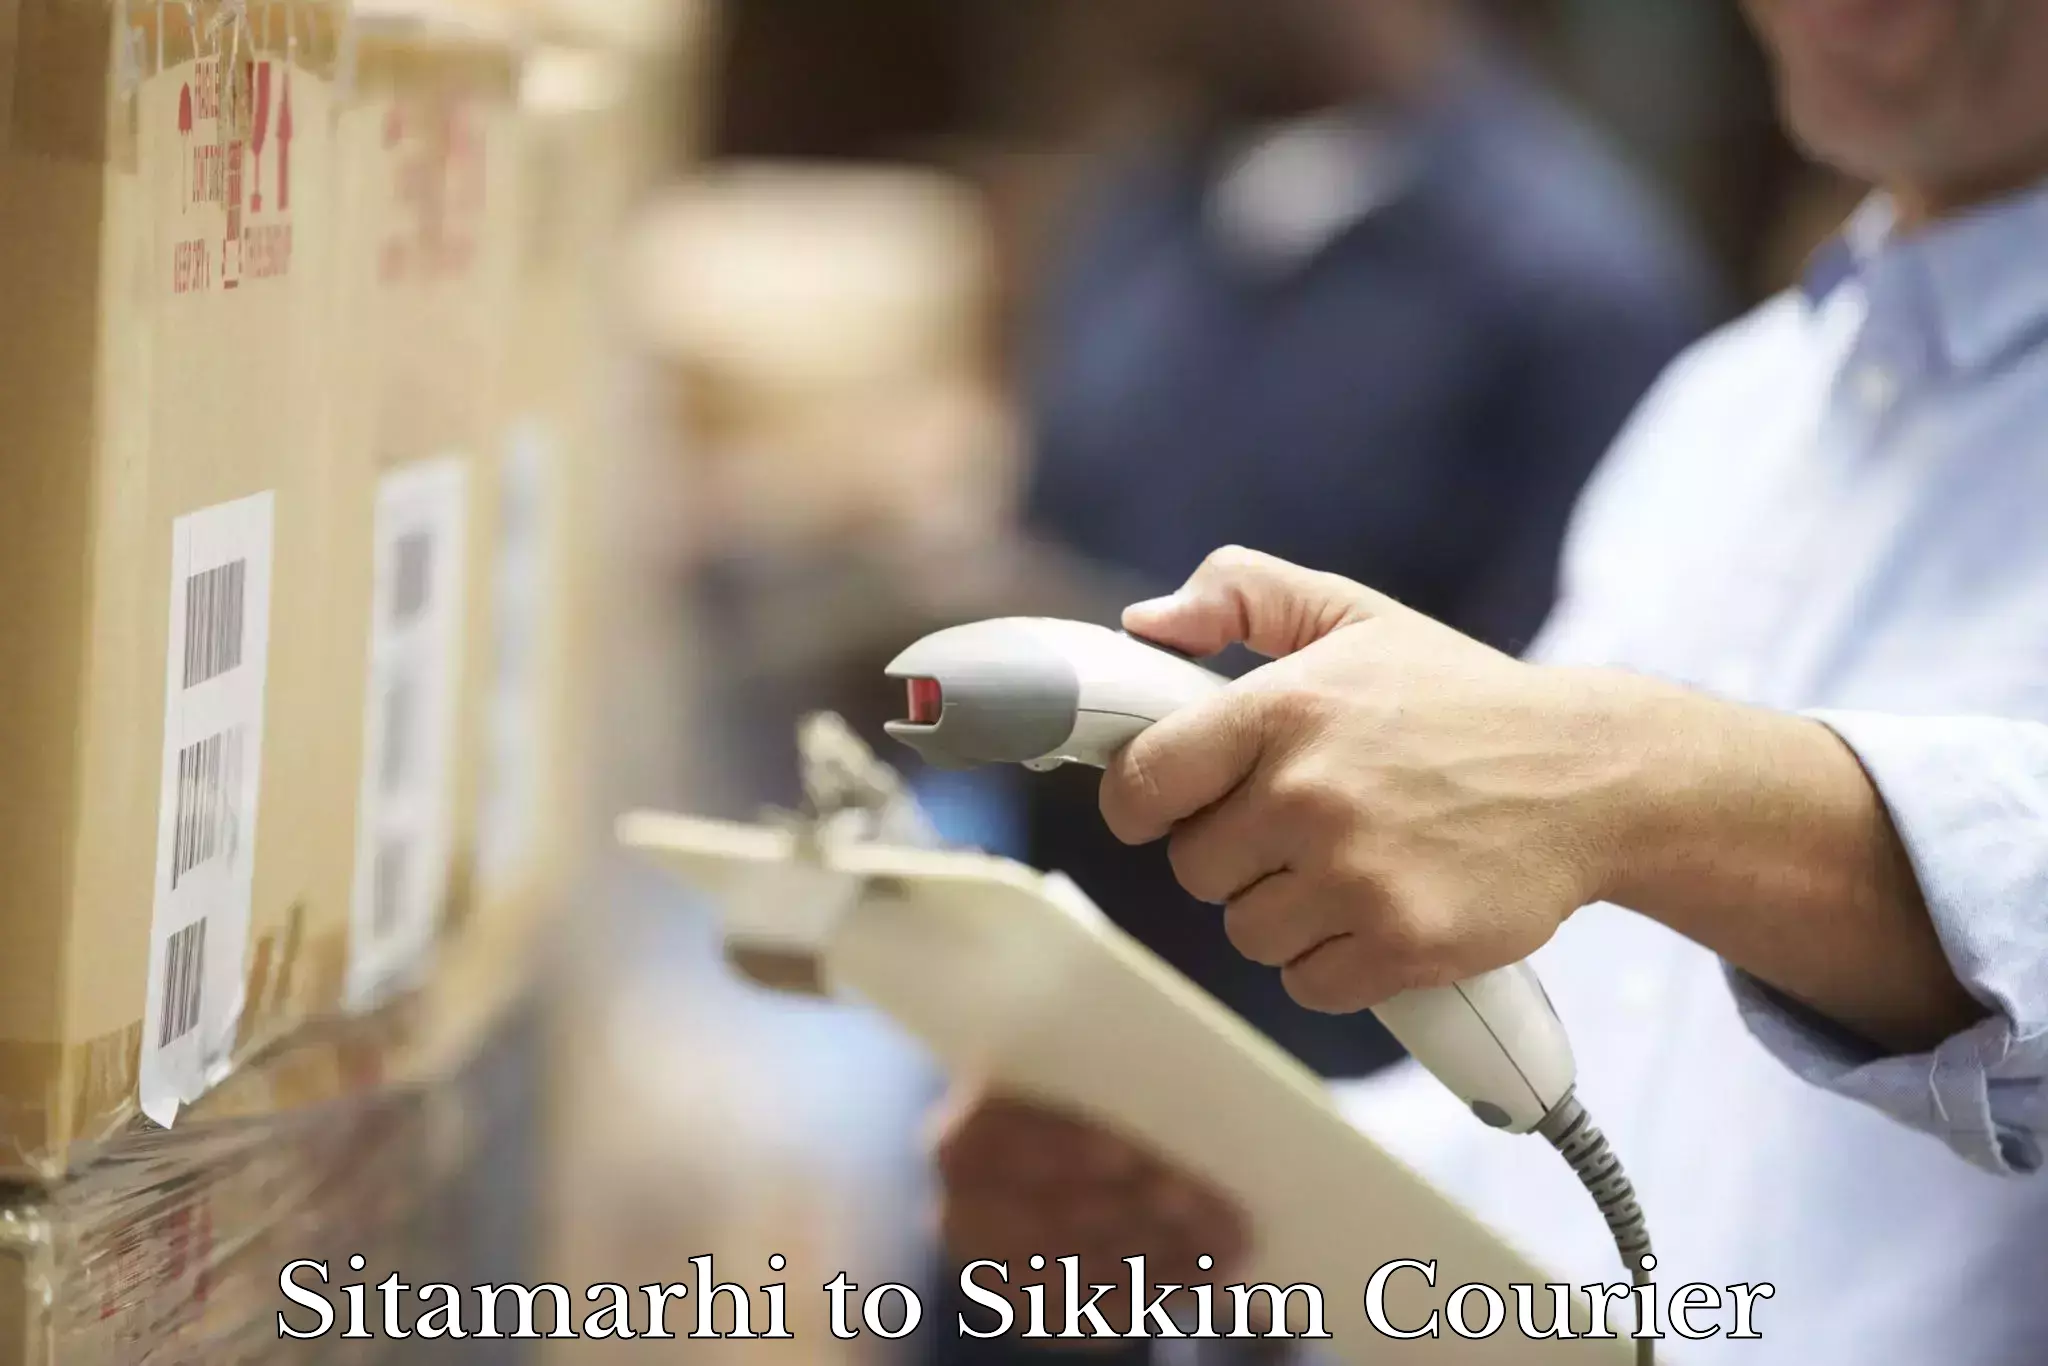 On-call courier service Sitamarhi to Pelling